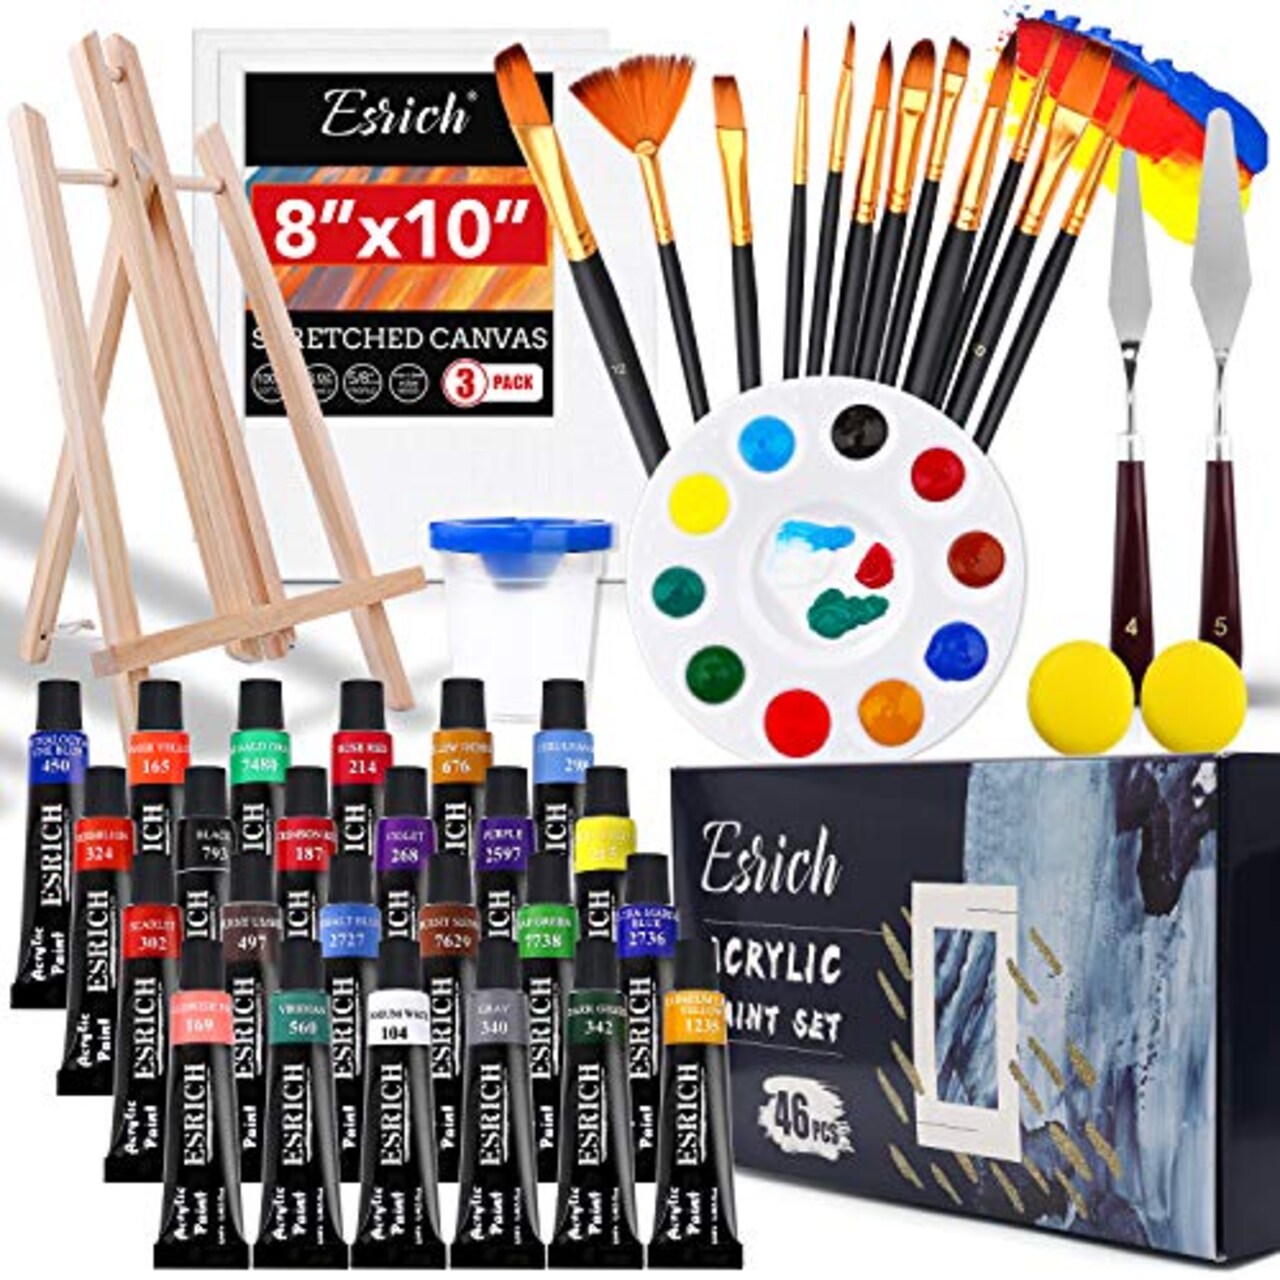 Acrylic Paint Set,46 Piece Professional Painting Supplies with Paint  Brushes, Acrylic Paint, Easel, Canvases, Palette, Paint Knives, Brush Cup  and Art Sponges for Hobbyists and Beginners